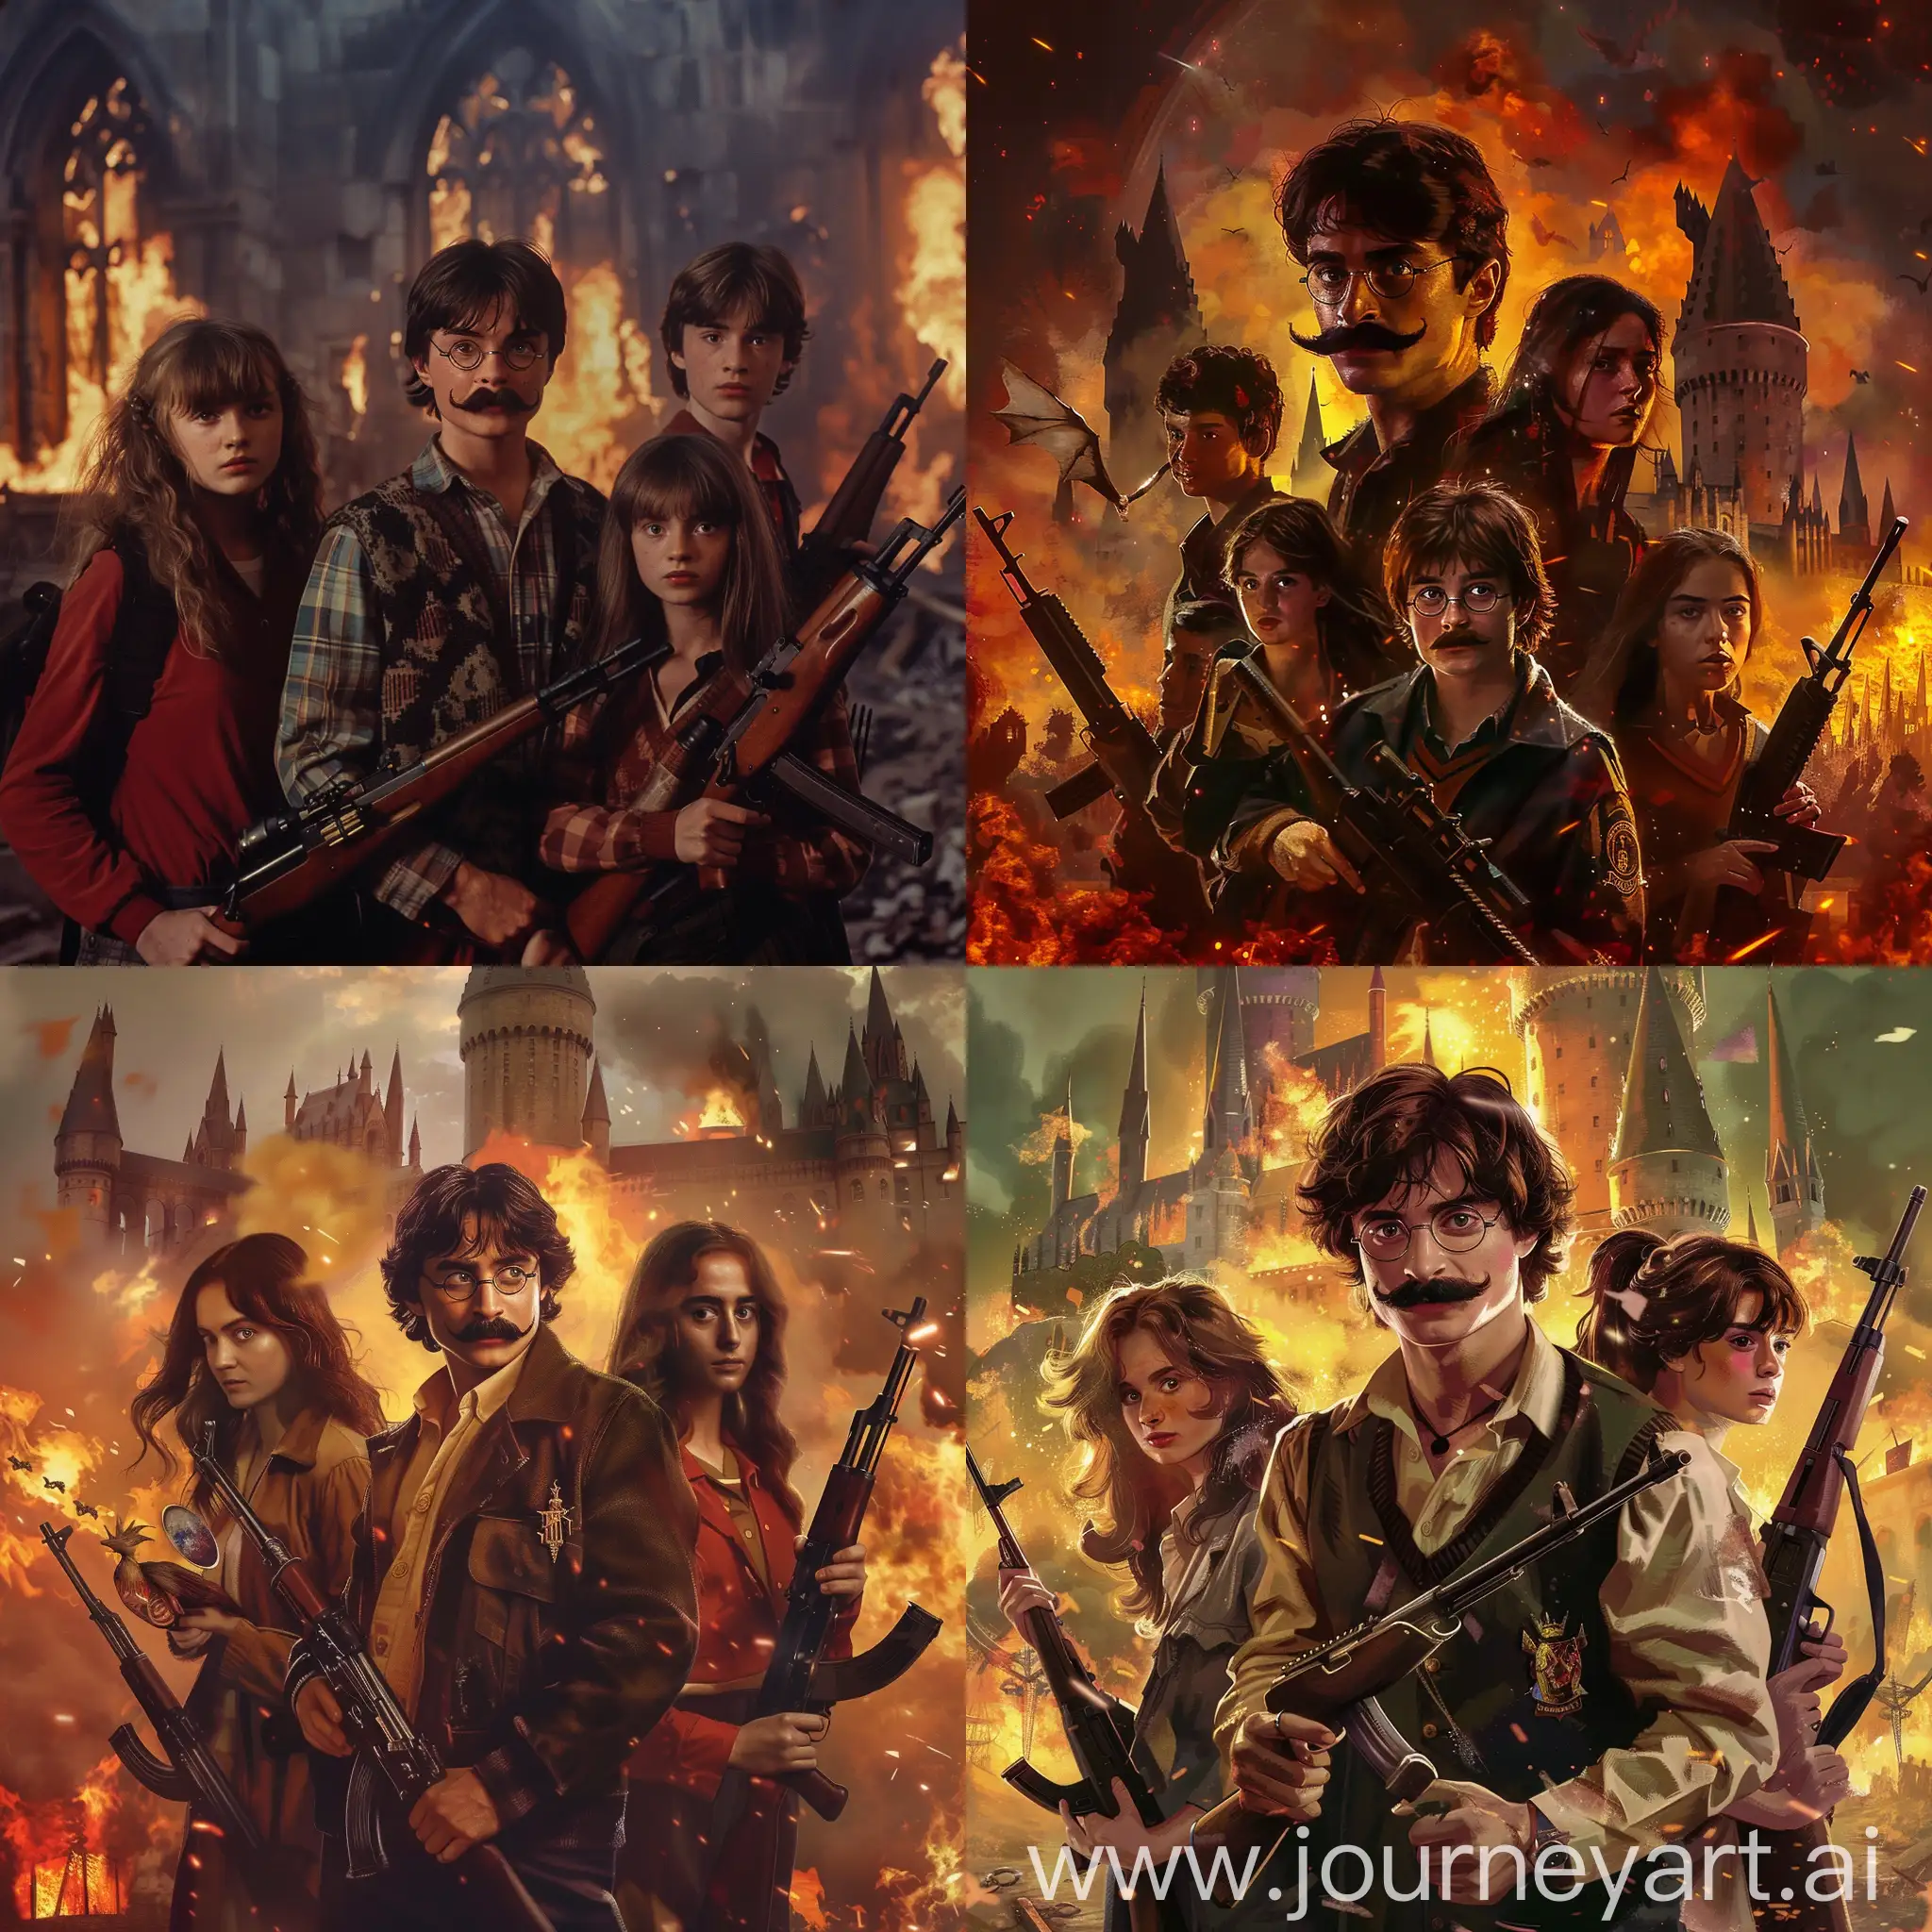 Harry Potter with mustache, Hermione, Luna and Ron, they have rifles in their hands, before Hogwarts school in fire